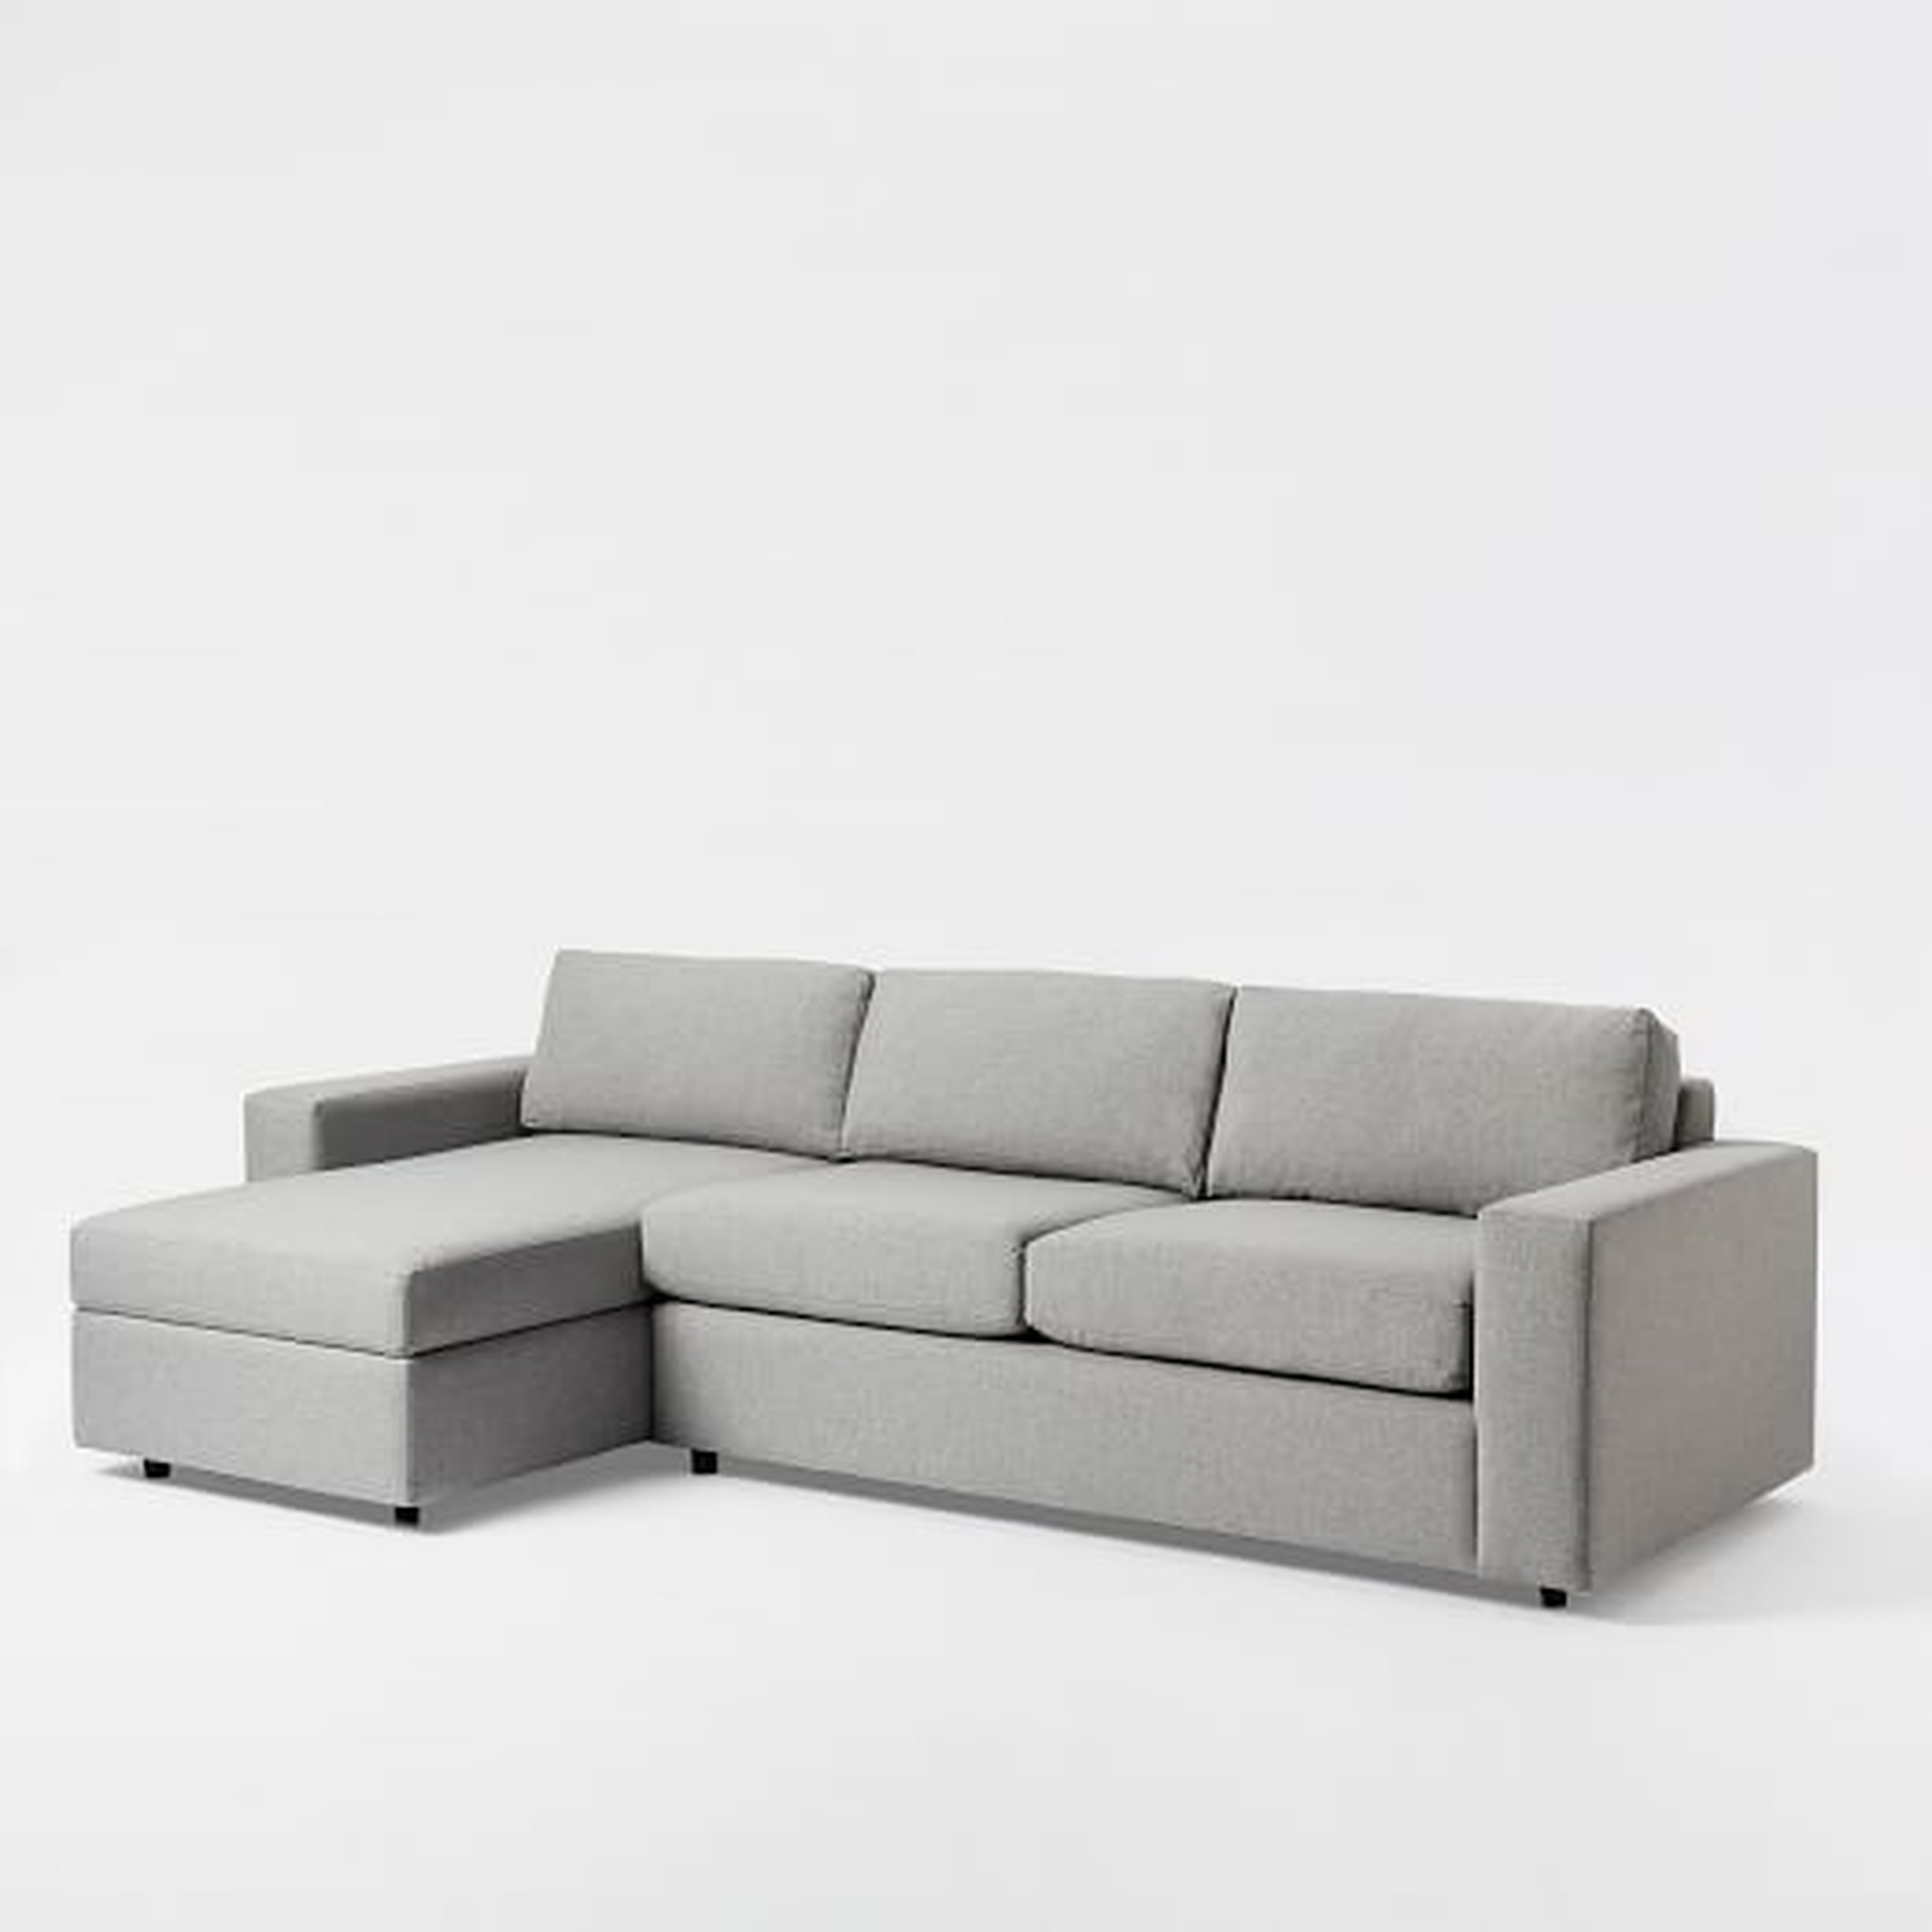 Urban 2-Piece Chaise Sectional - Small, Left Chaise 2-Piece Sectional - West Elm